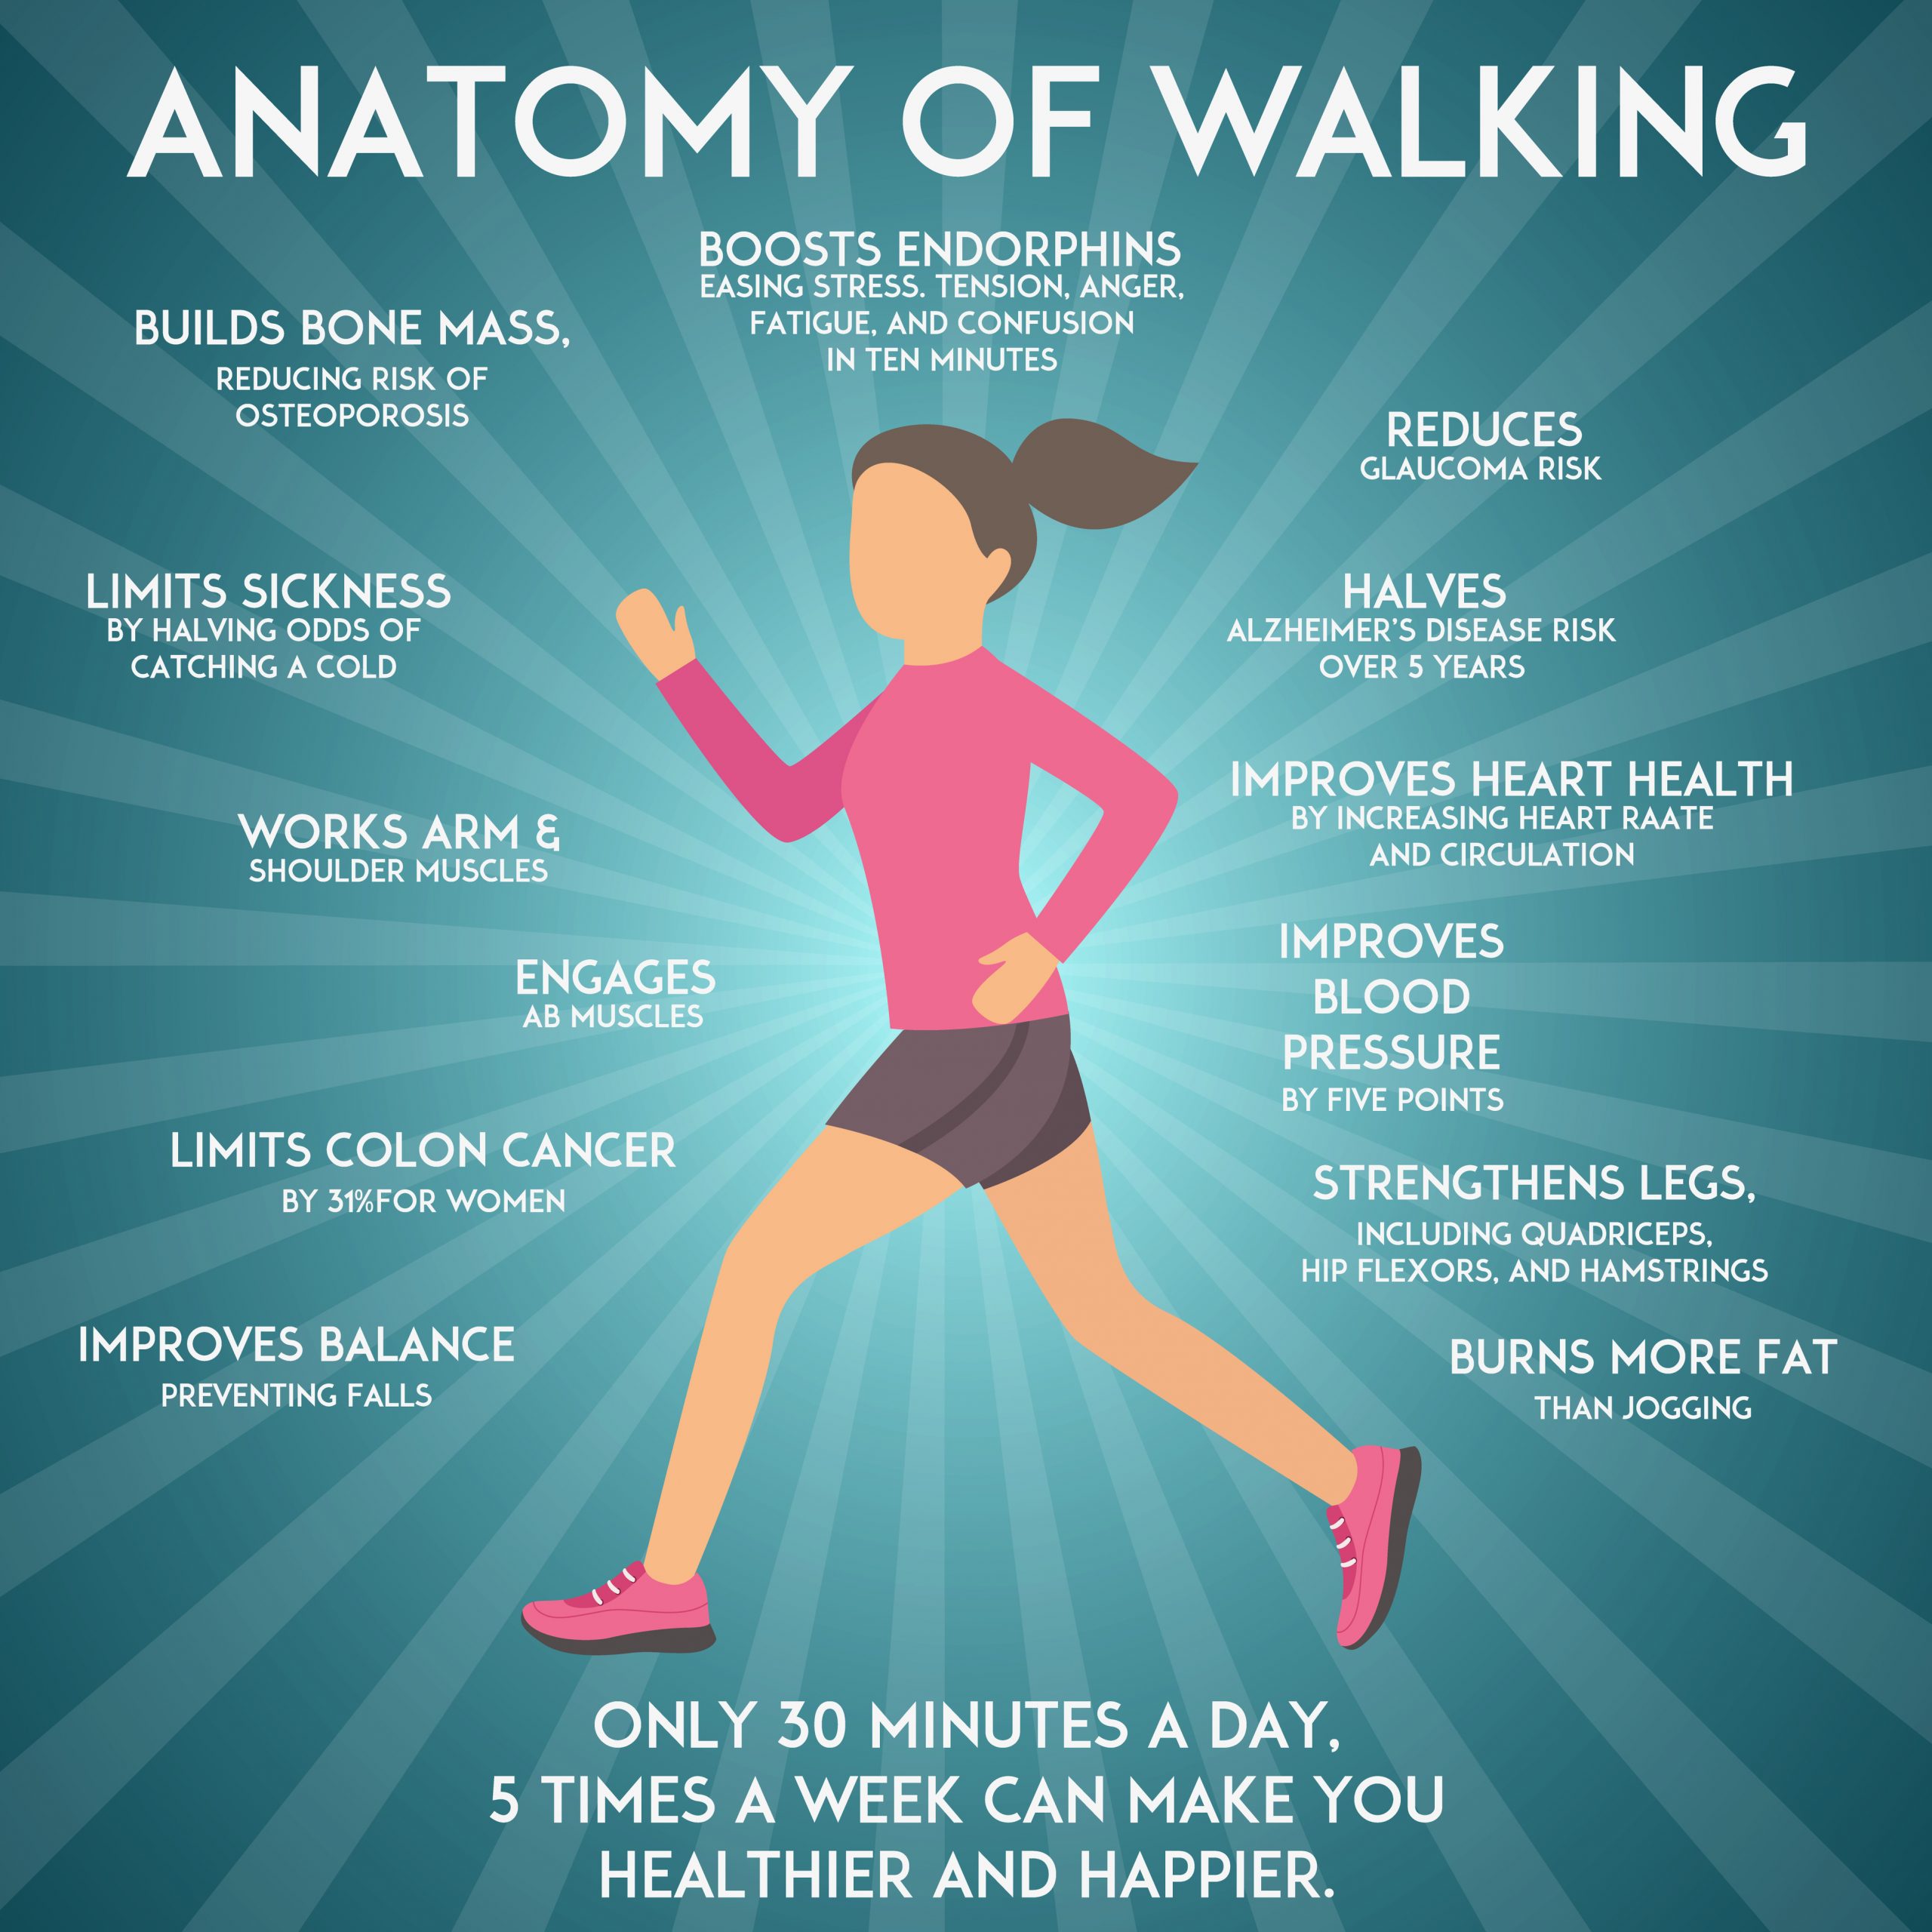 29 Things to Do While Walking — Walking for Health and Fitness